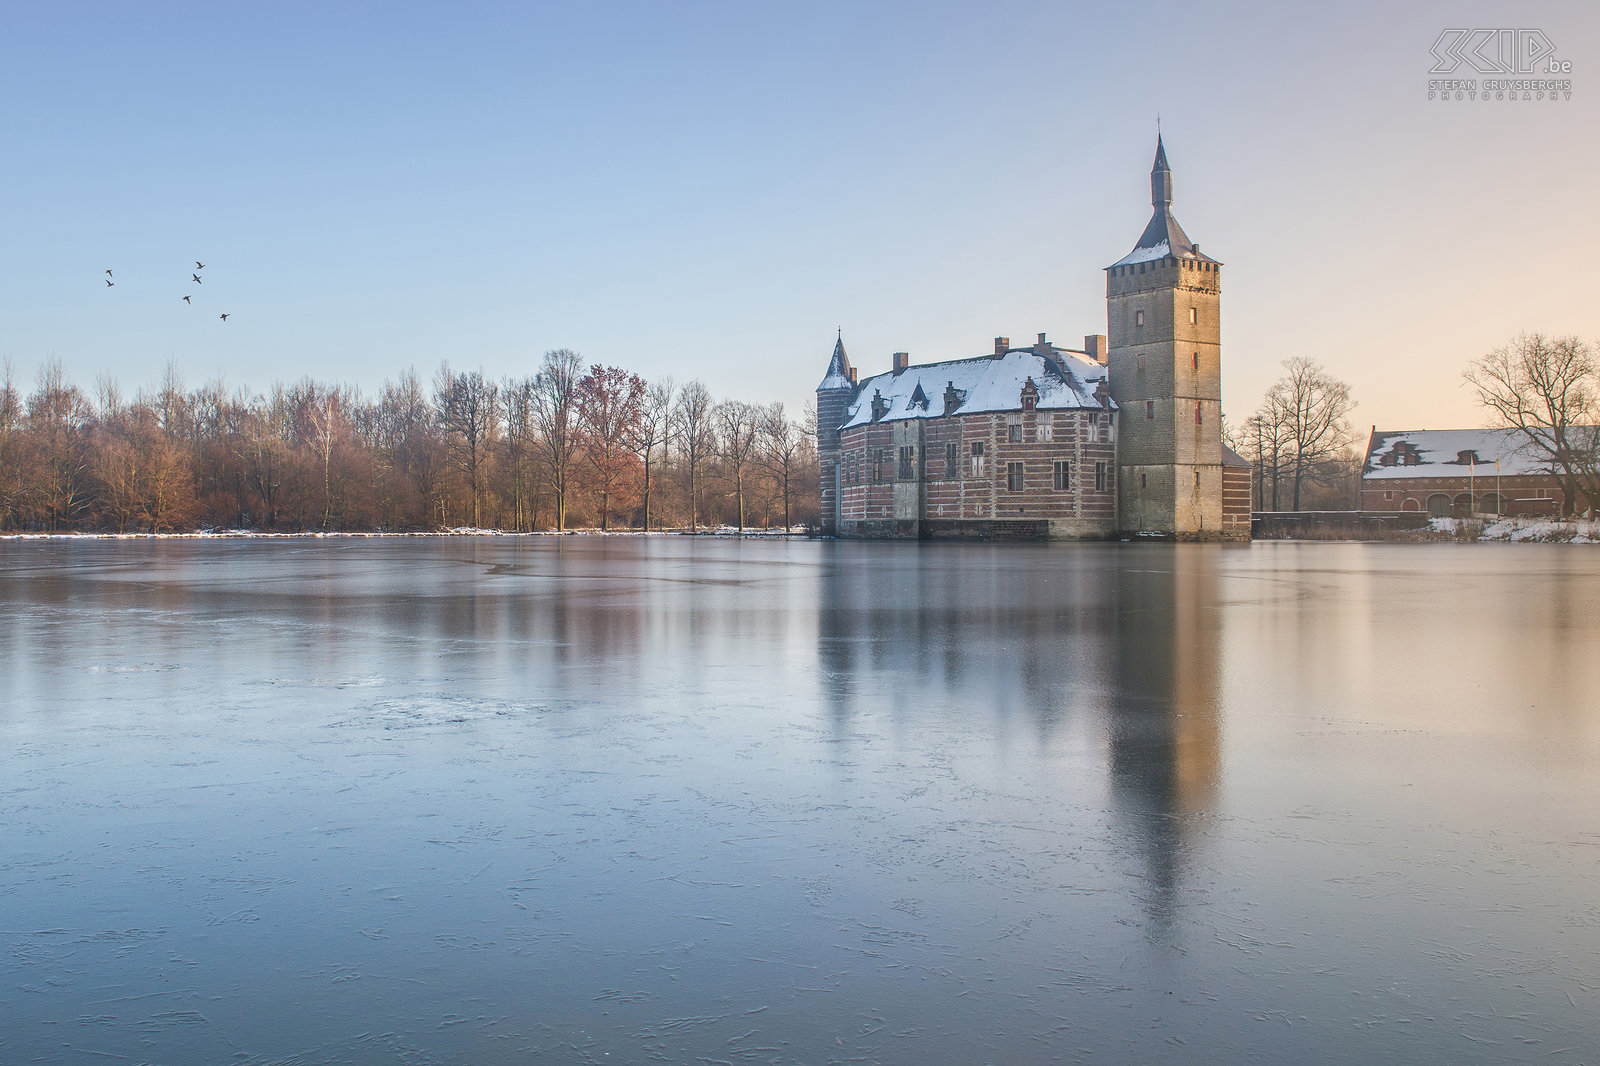 Winter in Sint-Pieters-Rode - Castle of Horst The castle of Horst during a cold winter day with snow one hour after sunrise. Stefan Cruysberghs